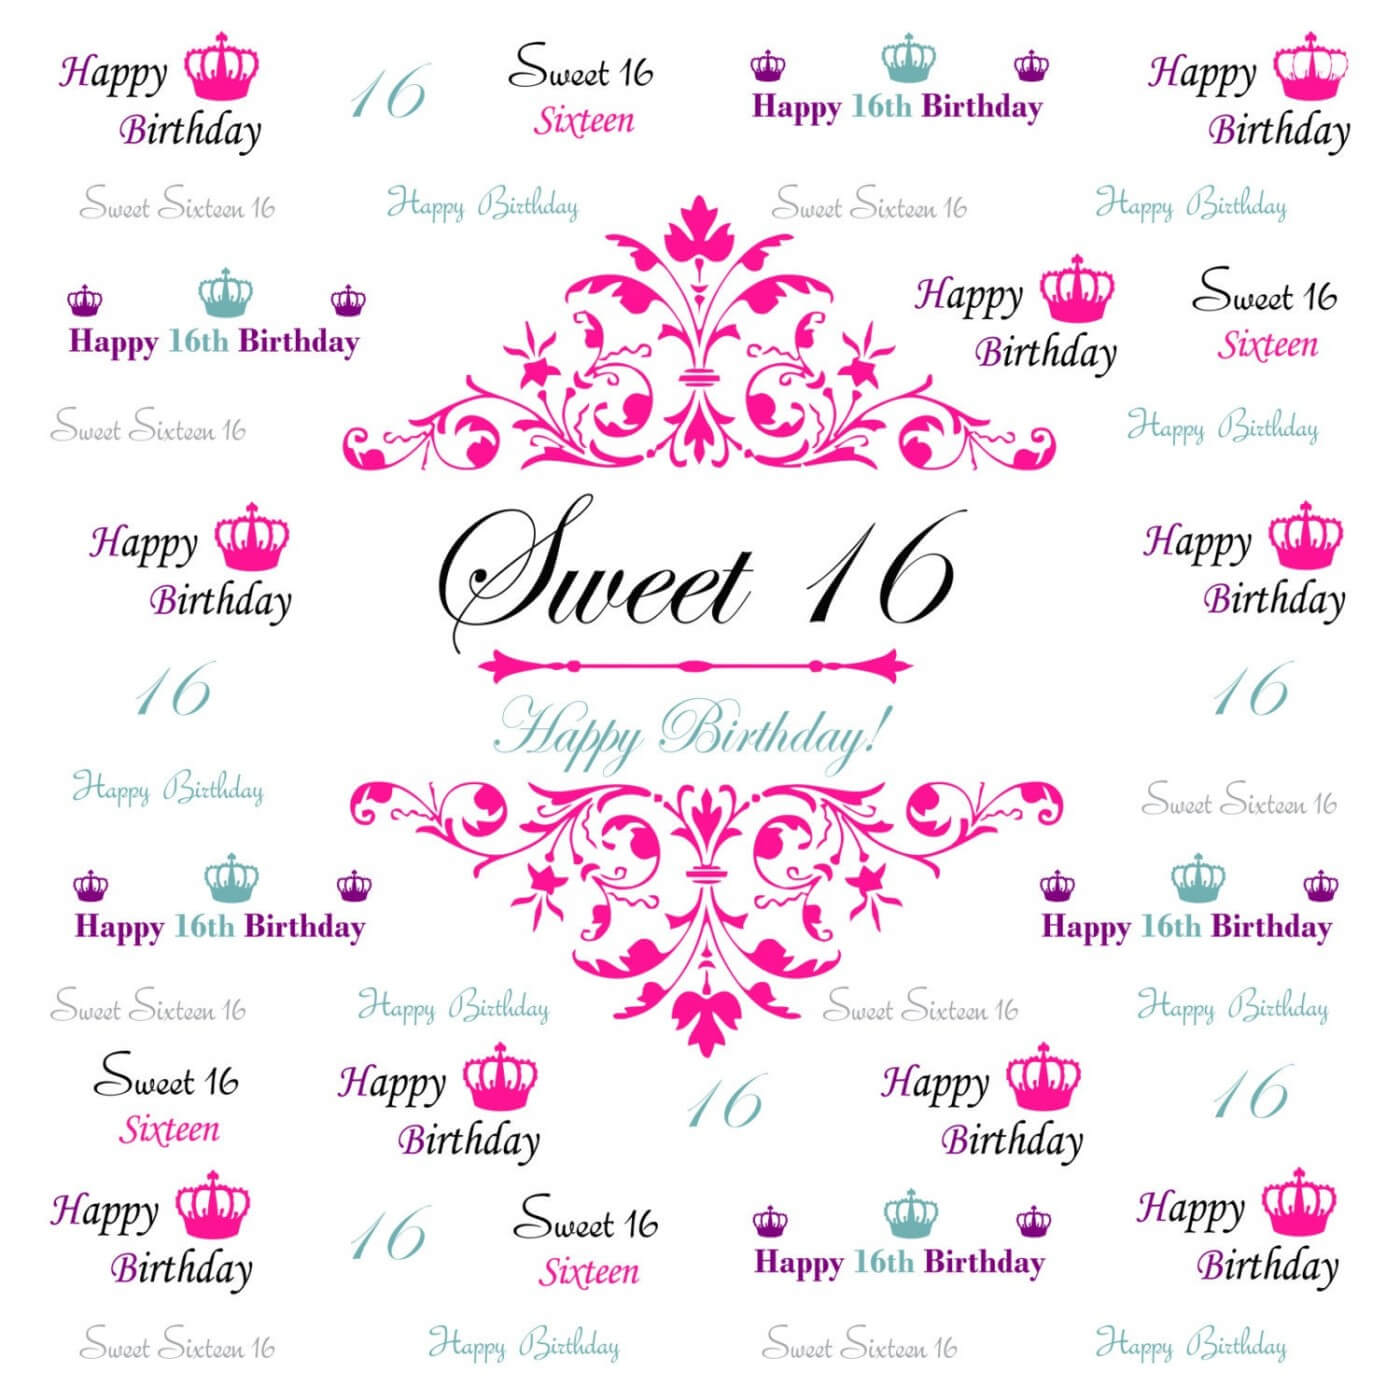 021 Template Ideas Step And Repeat Banner Il Fullxfull Inside Sweet 16 Banner Template